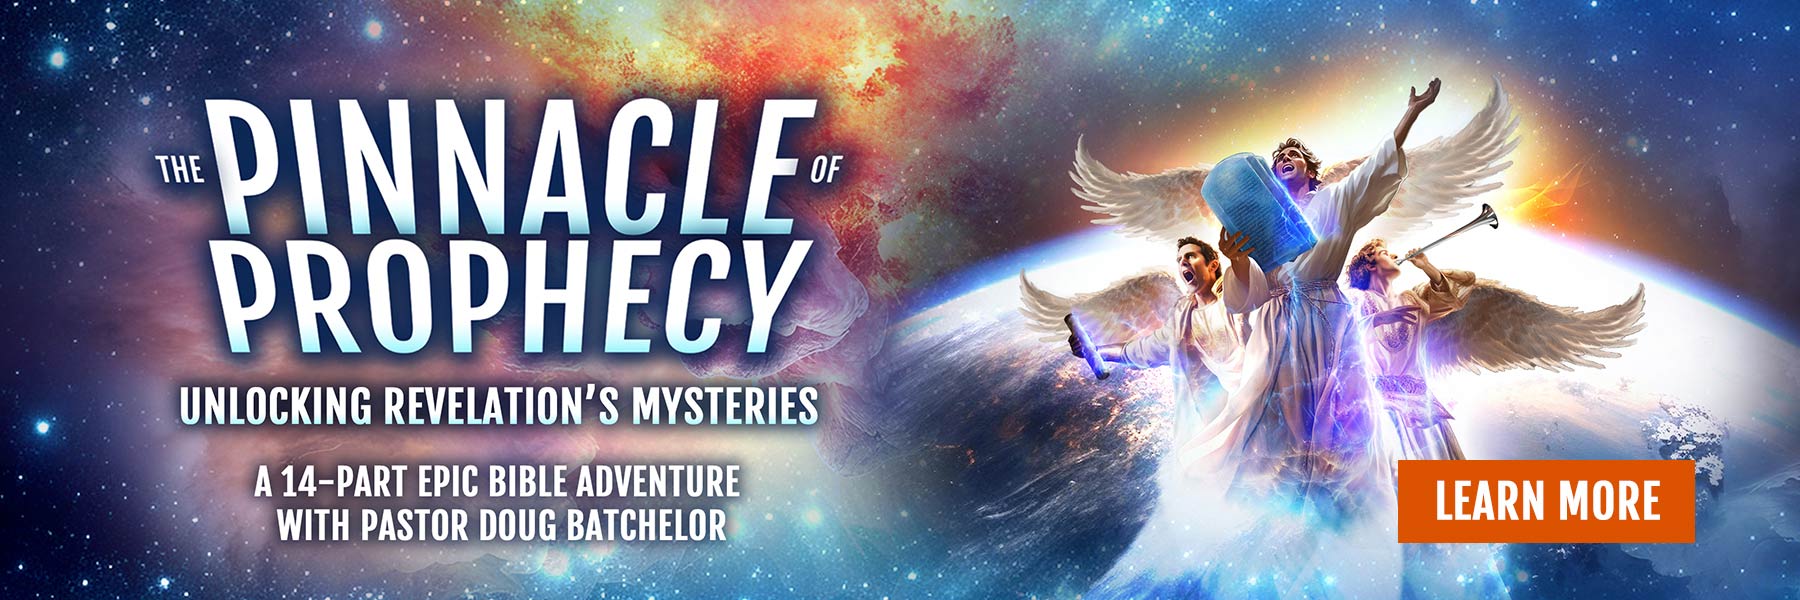 The Pinnacle of Prophecy header title with three angels in space.